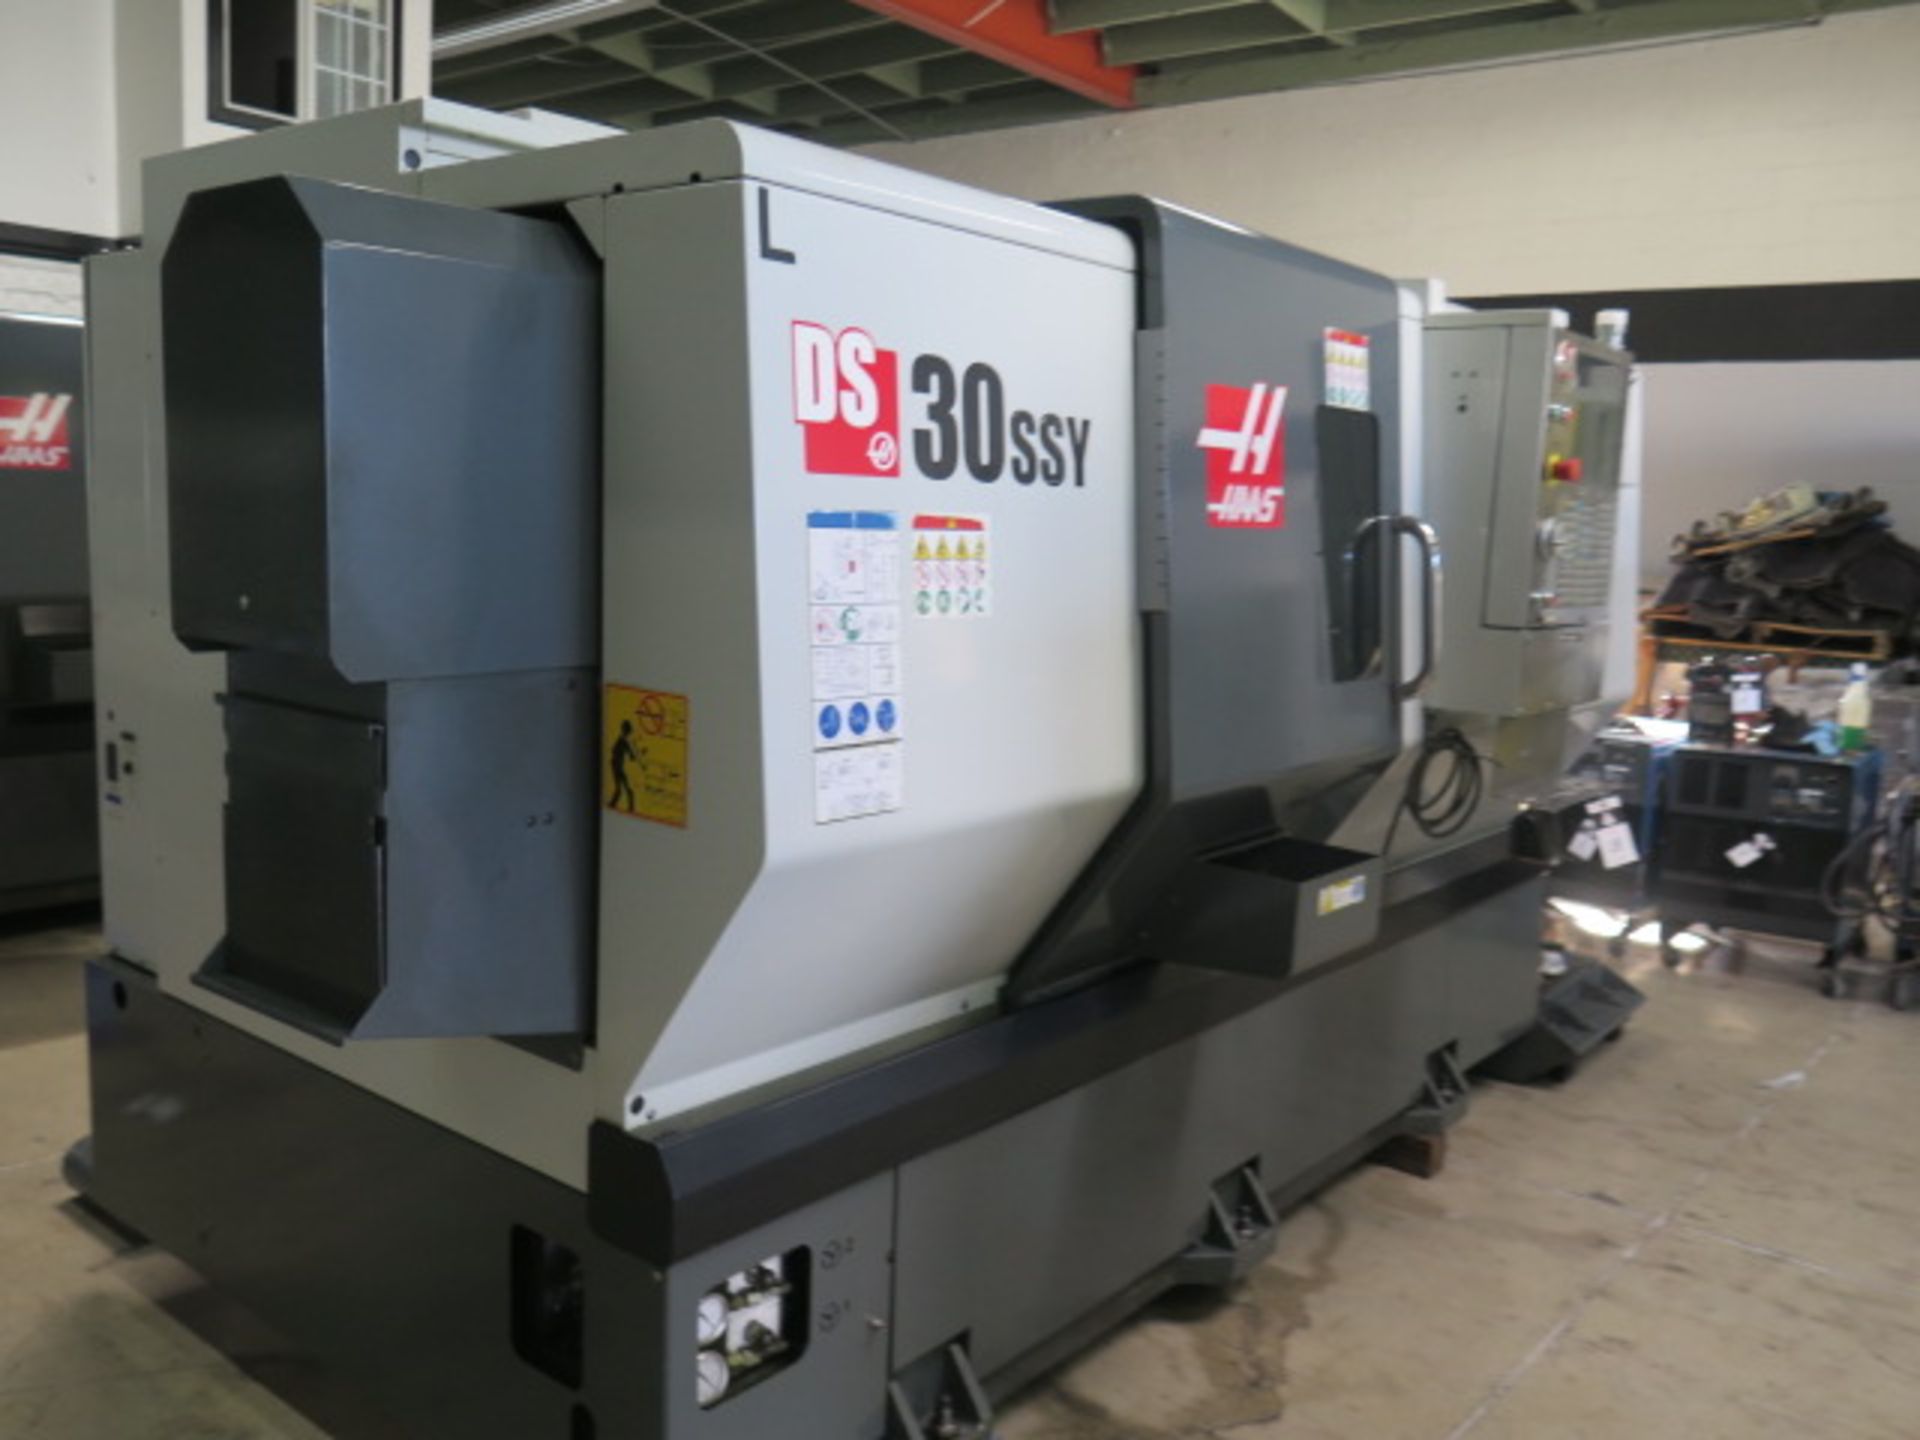 2017 Haas DS-30SSY Dual Spindle y-Axis CNC Turning Center s/n 3107553 w/ Haas Controls, SOLD AS IS - Image 2 of 18